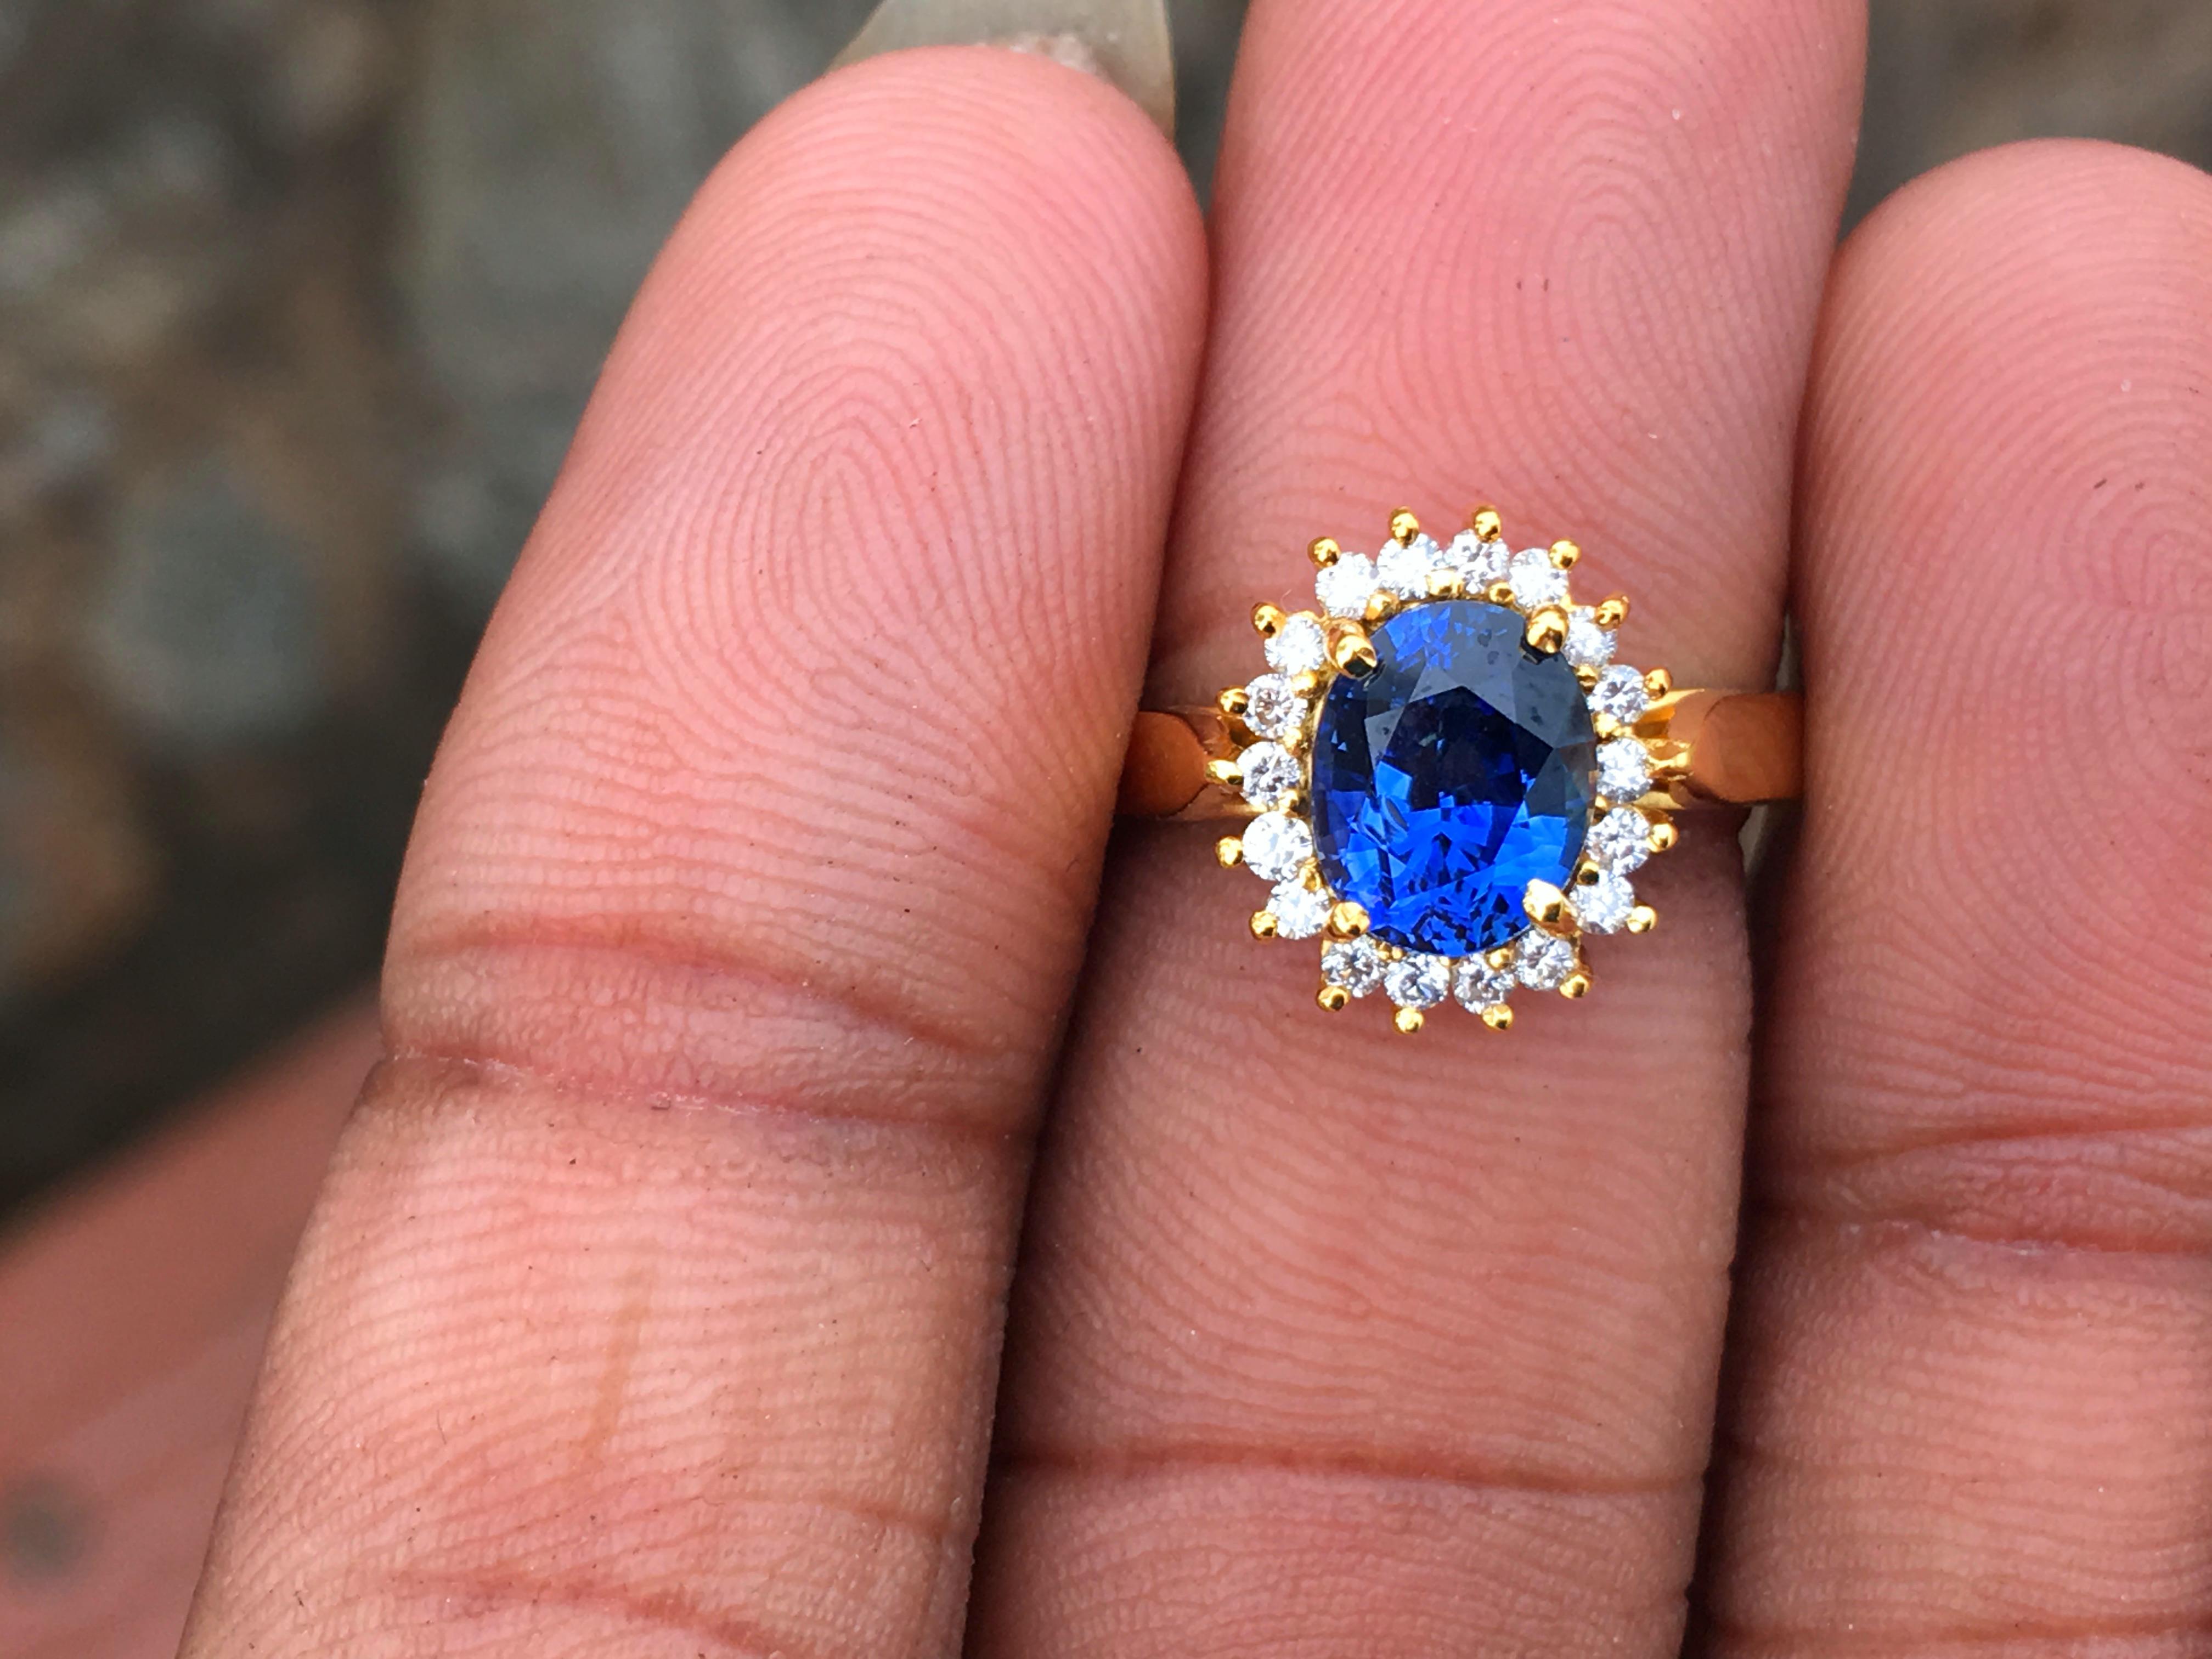 Blue Sapphire Engagement Rings Meaning|5 Amazing Ring Designs